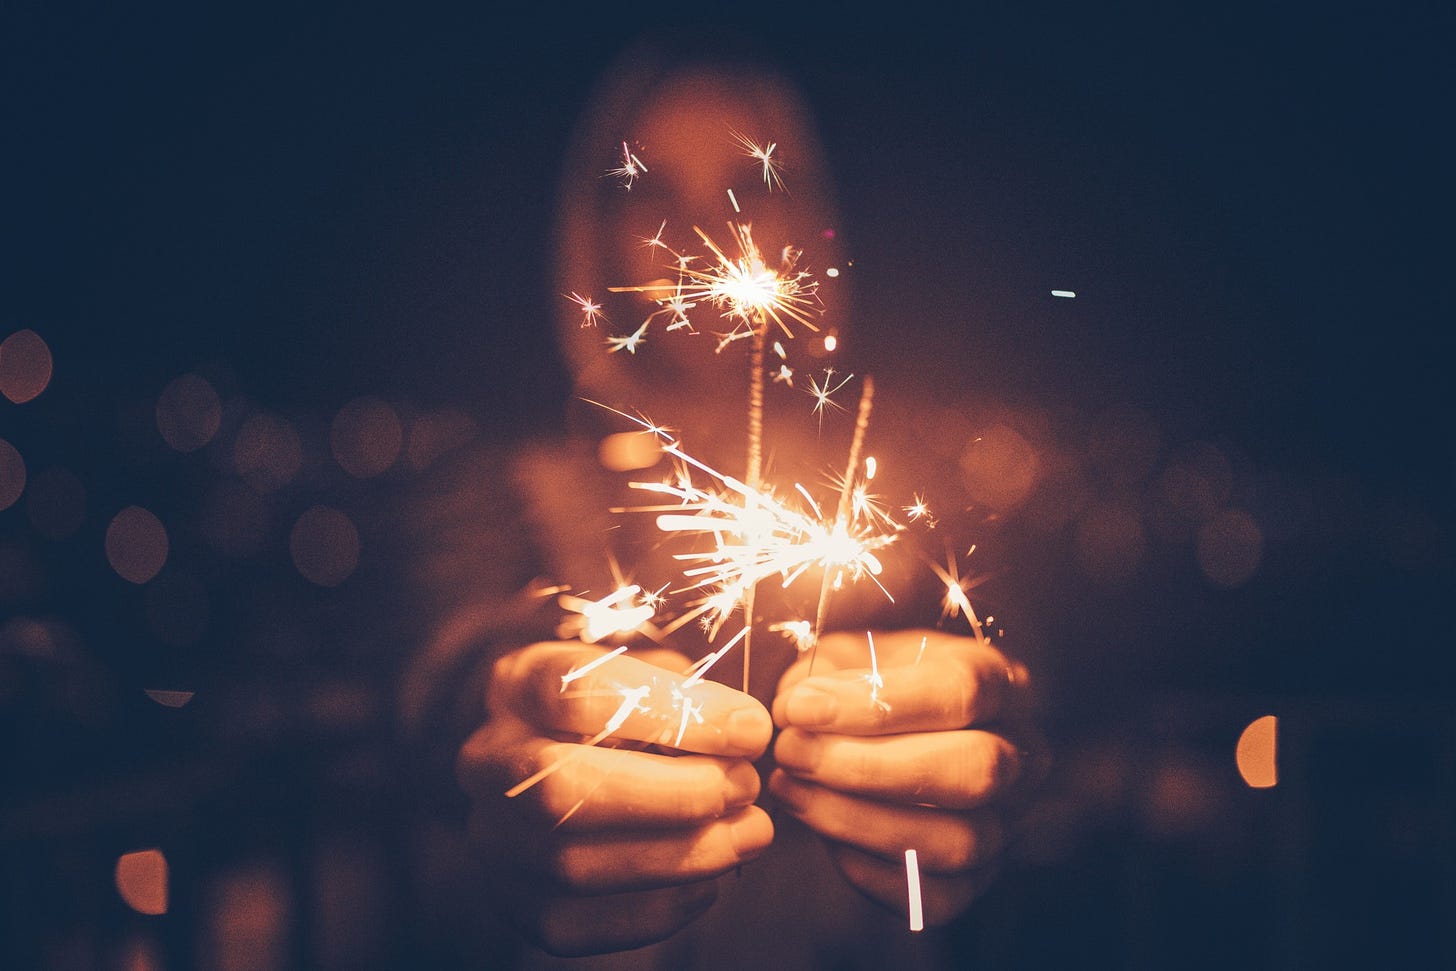 A man holds two sparklers up to the camera against a blurred background.